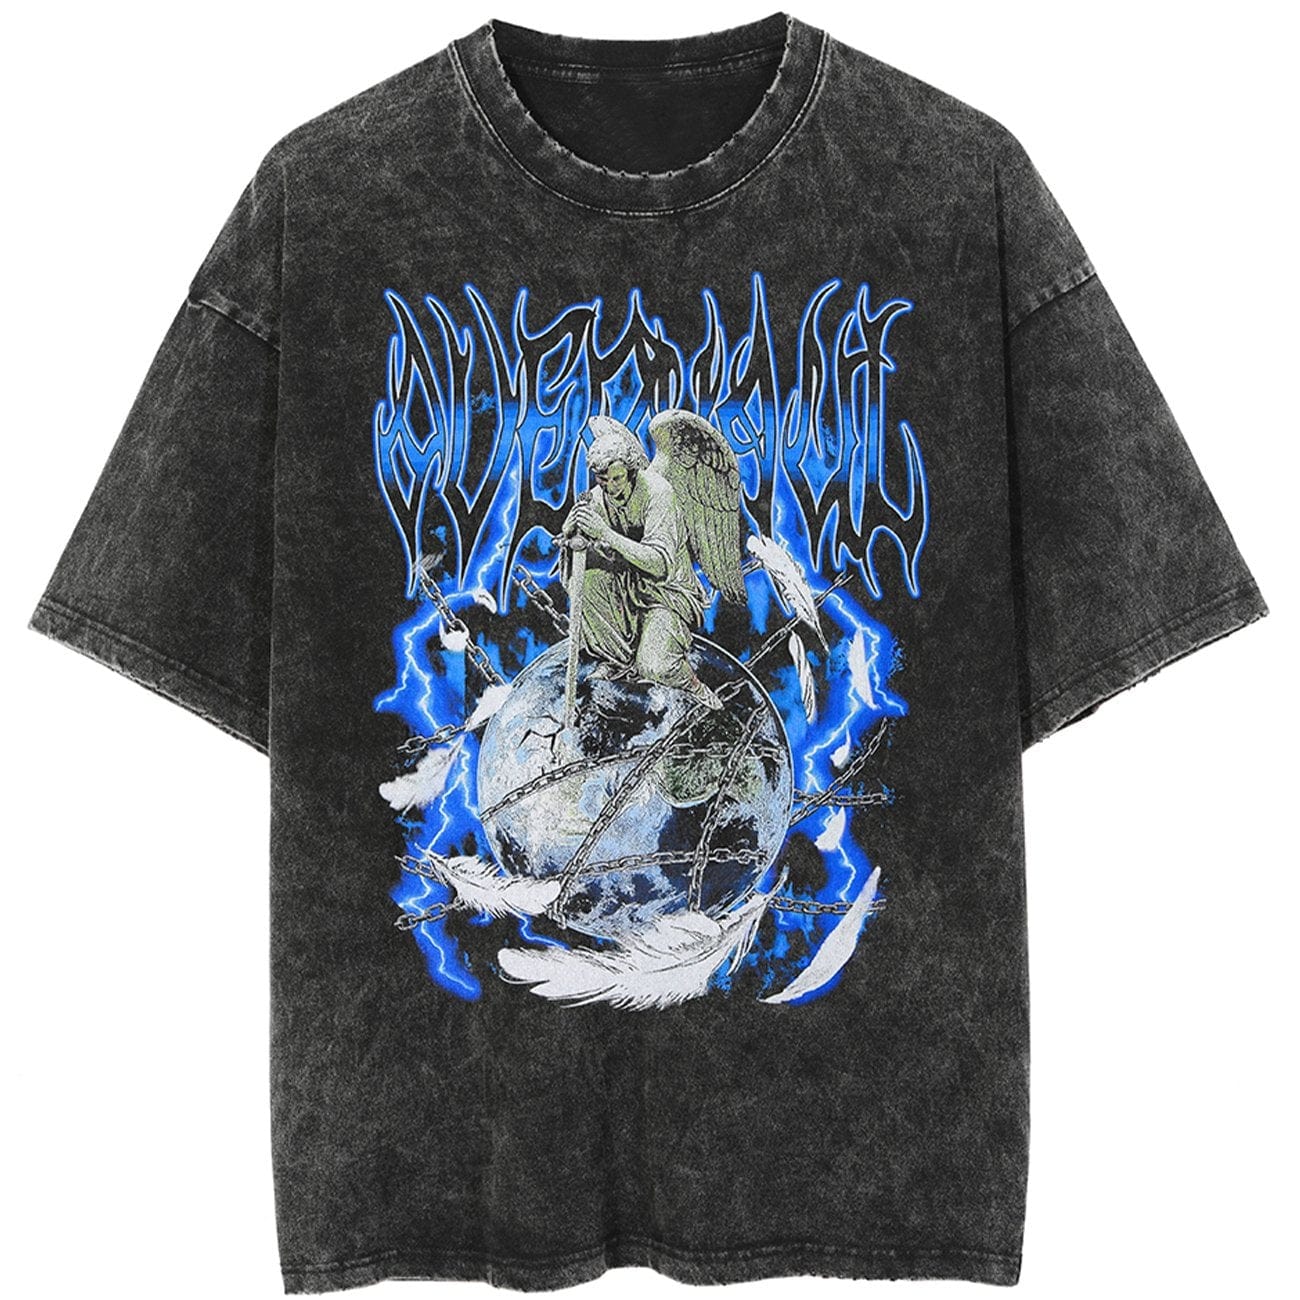 Angel Crushes The Lock Earth Cotton Washed Graphic Tee Streetwear Brand Techwear Combat Tactical YUGEN THEORY